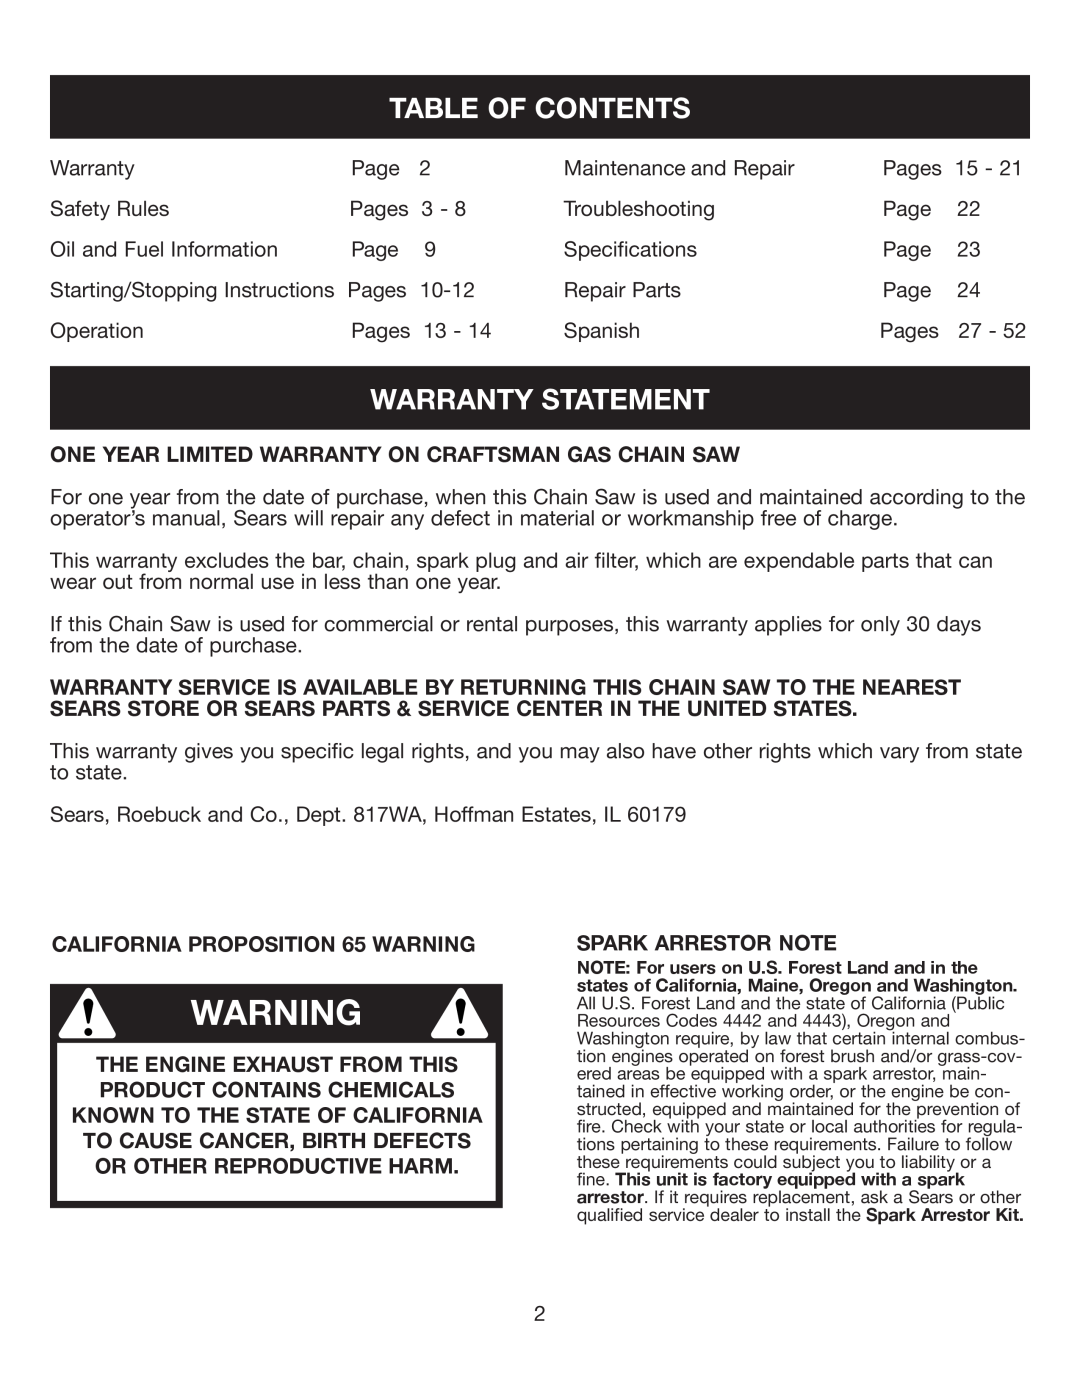 Sears 316.35084 manual Table Of Contents, Warranty Statement, One Year Limited Warranty On Craftsman Gas Chain Saw 